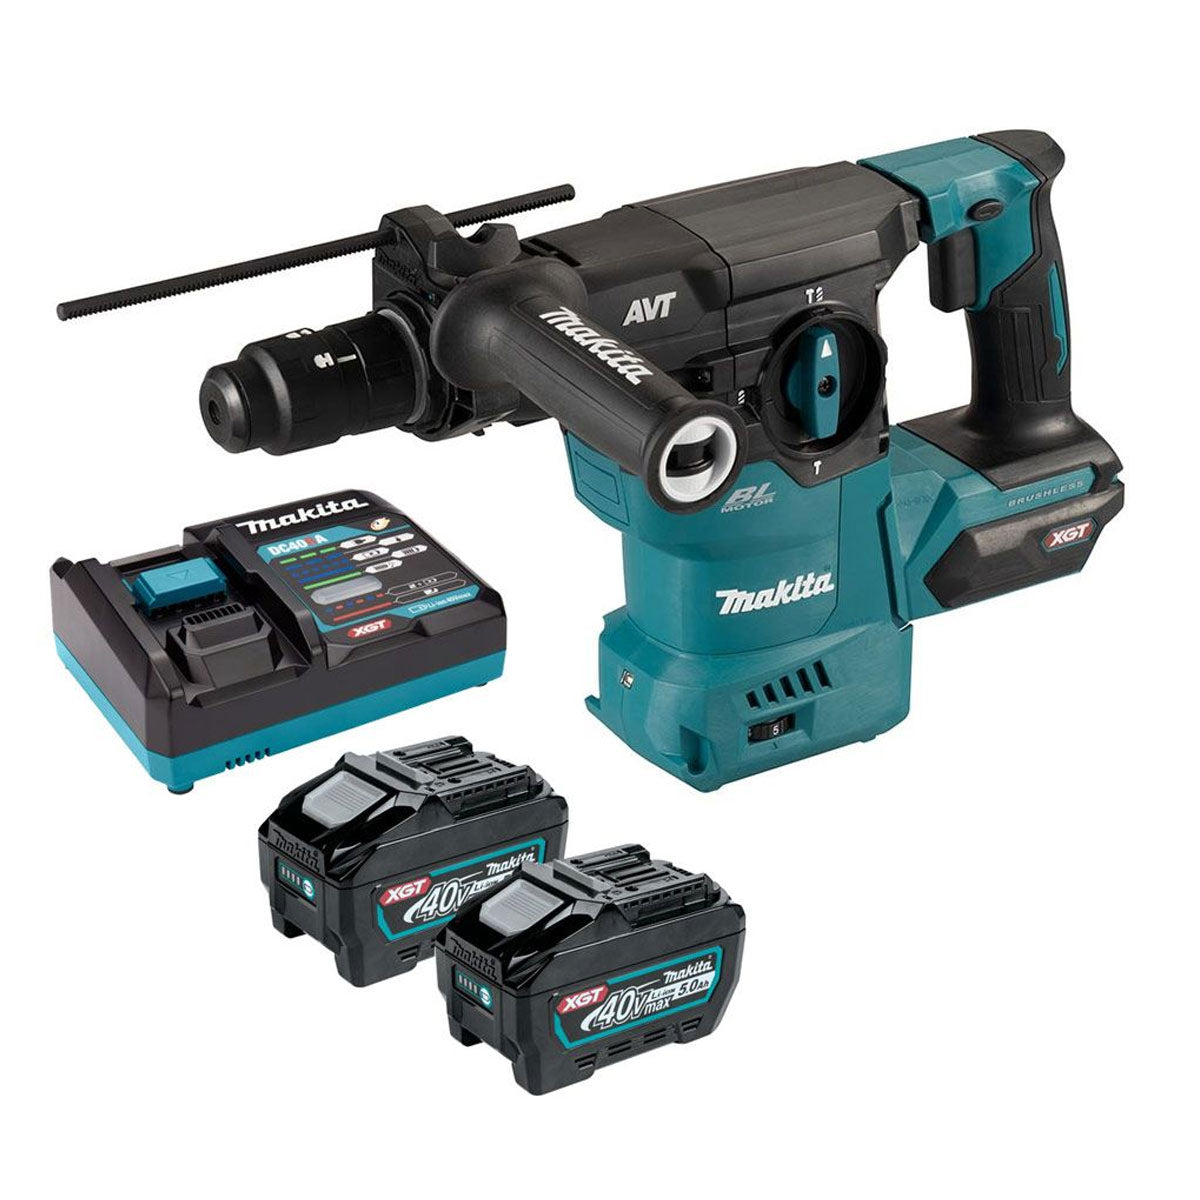 Makita HR009GT201 40V XGT Brushless Rotary Hammer with 2 x 5.0Ah Battery & Charger